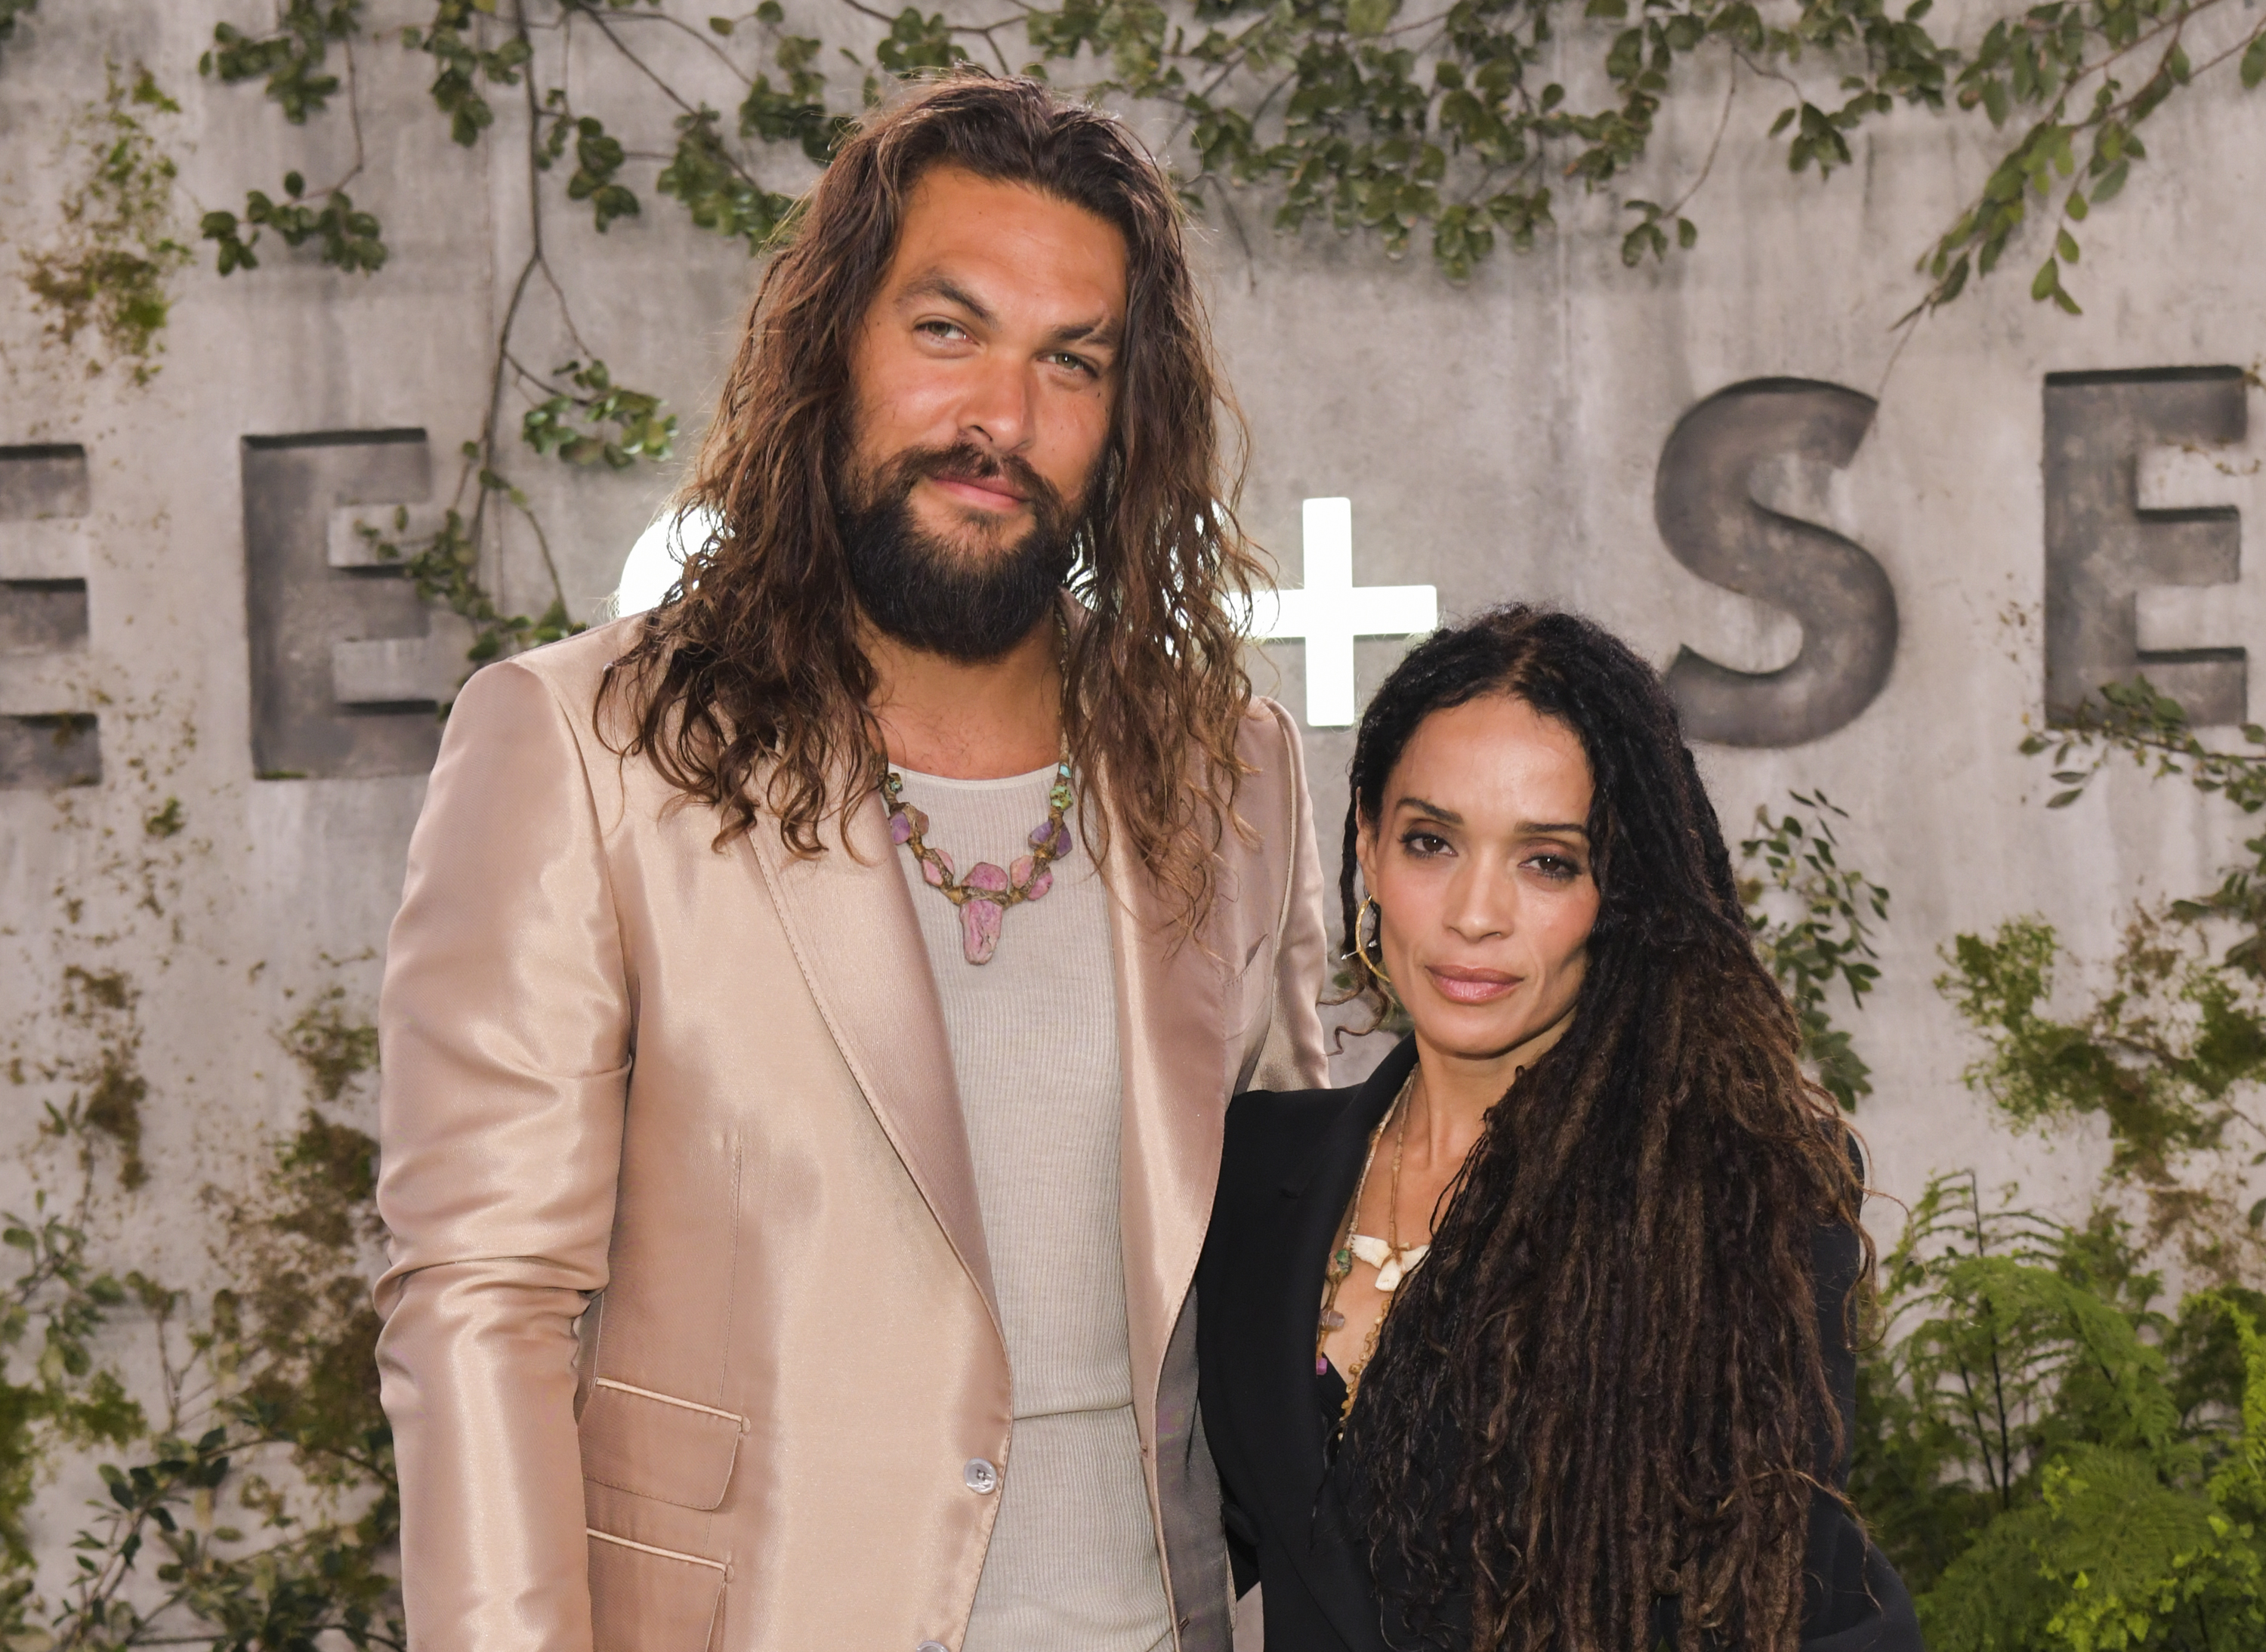 Jason Momoa and Lisa Bonet attend the premiere of Apple TV+'s "See" on October 21, 2019, in Los Angeles, California | Source: Getty Images